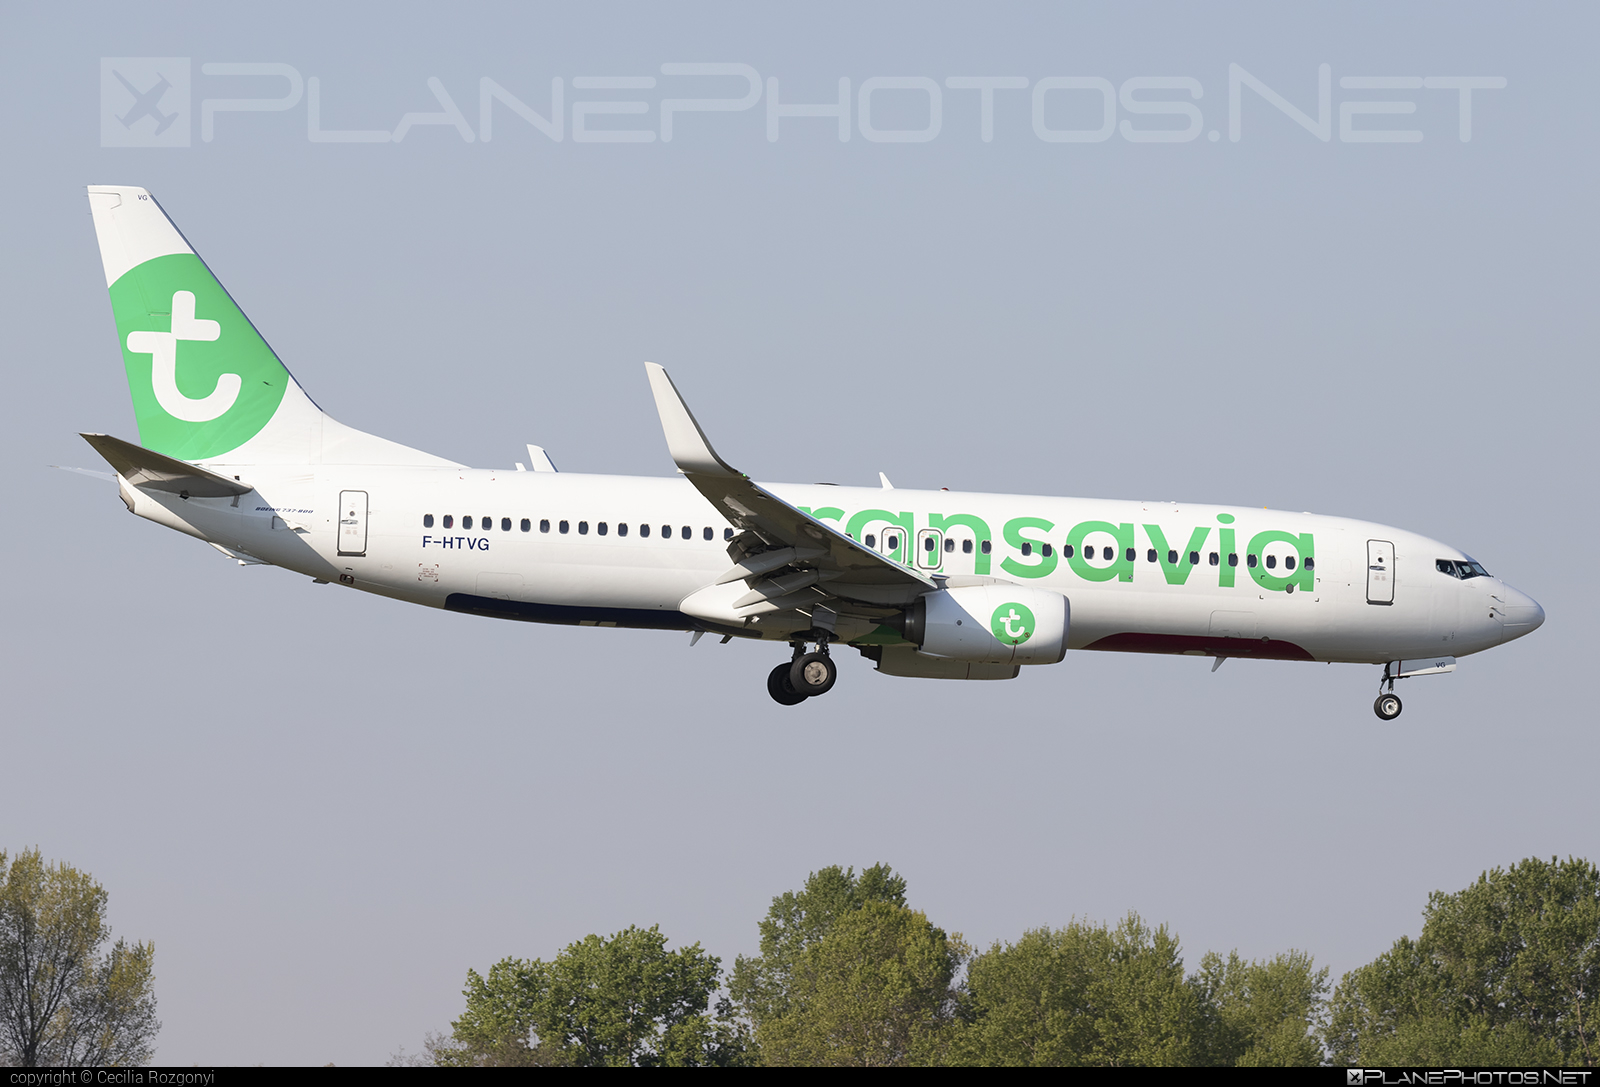 Boeing 737-800 - F-HTVG operated by Transavia France #b737 #b737nextgen #b737ng #boeing #boeing737 #transavia #transaviaFrance